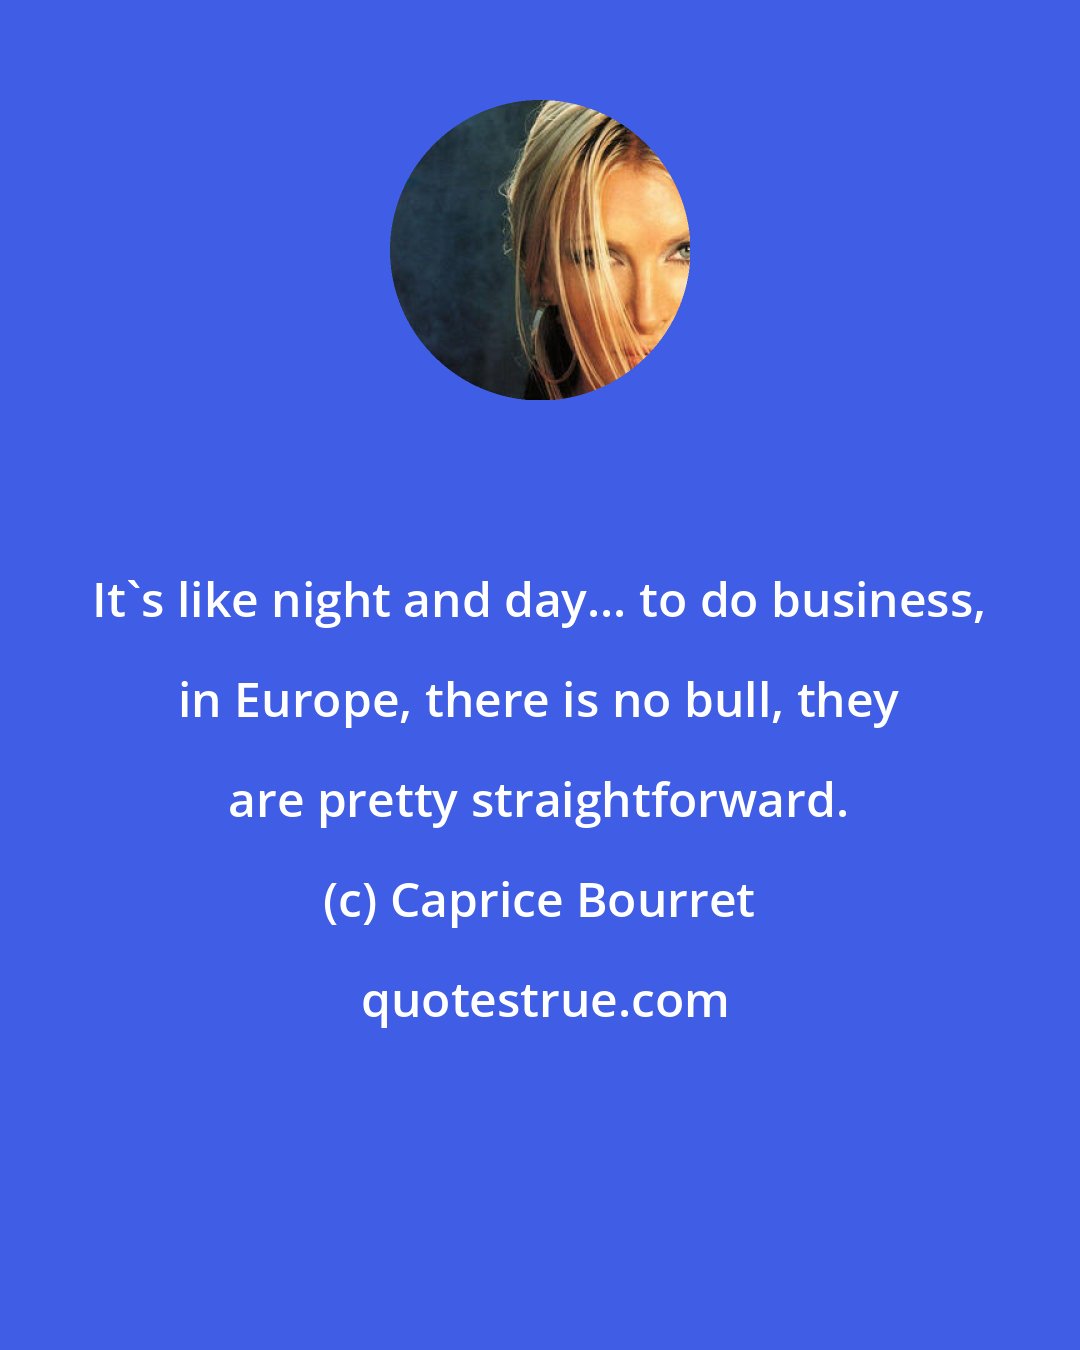 Caprice Bourret: It's like night and day... to do business, in Europe, there is no bull, they are pretty straightforward.